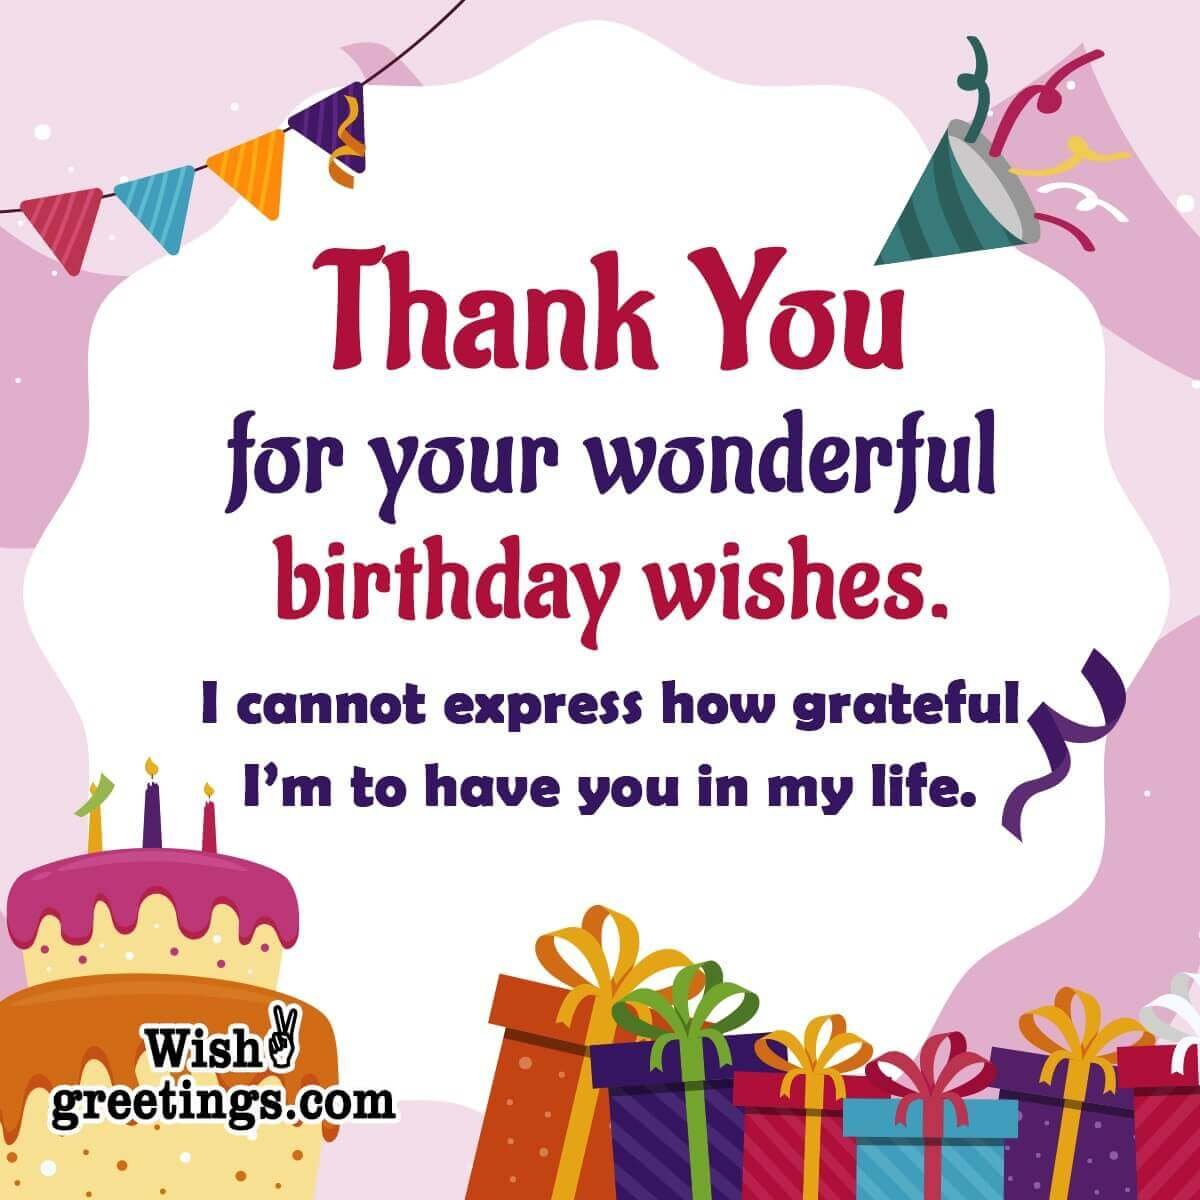 Thank you for Birthday Wishes - Wish Greetings